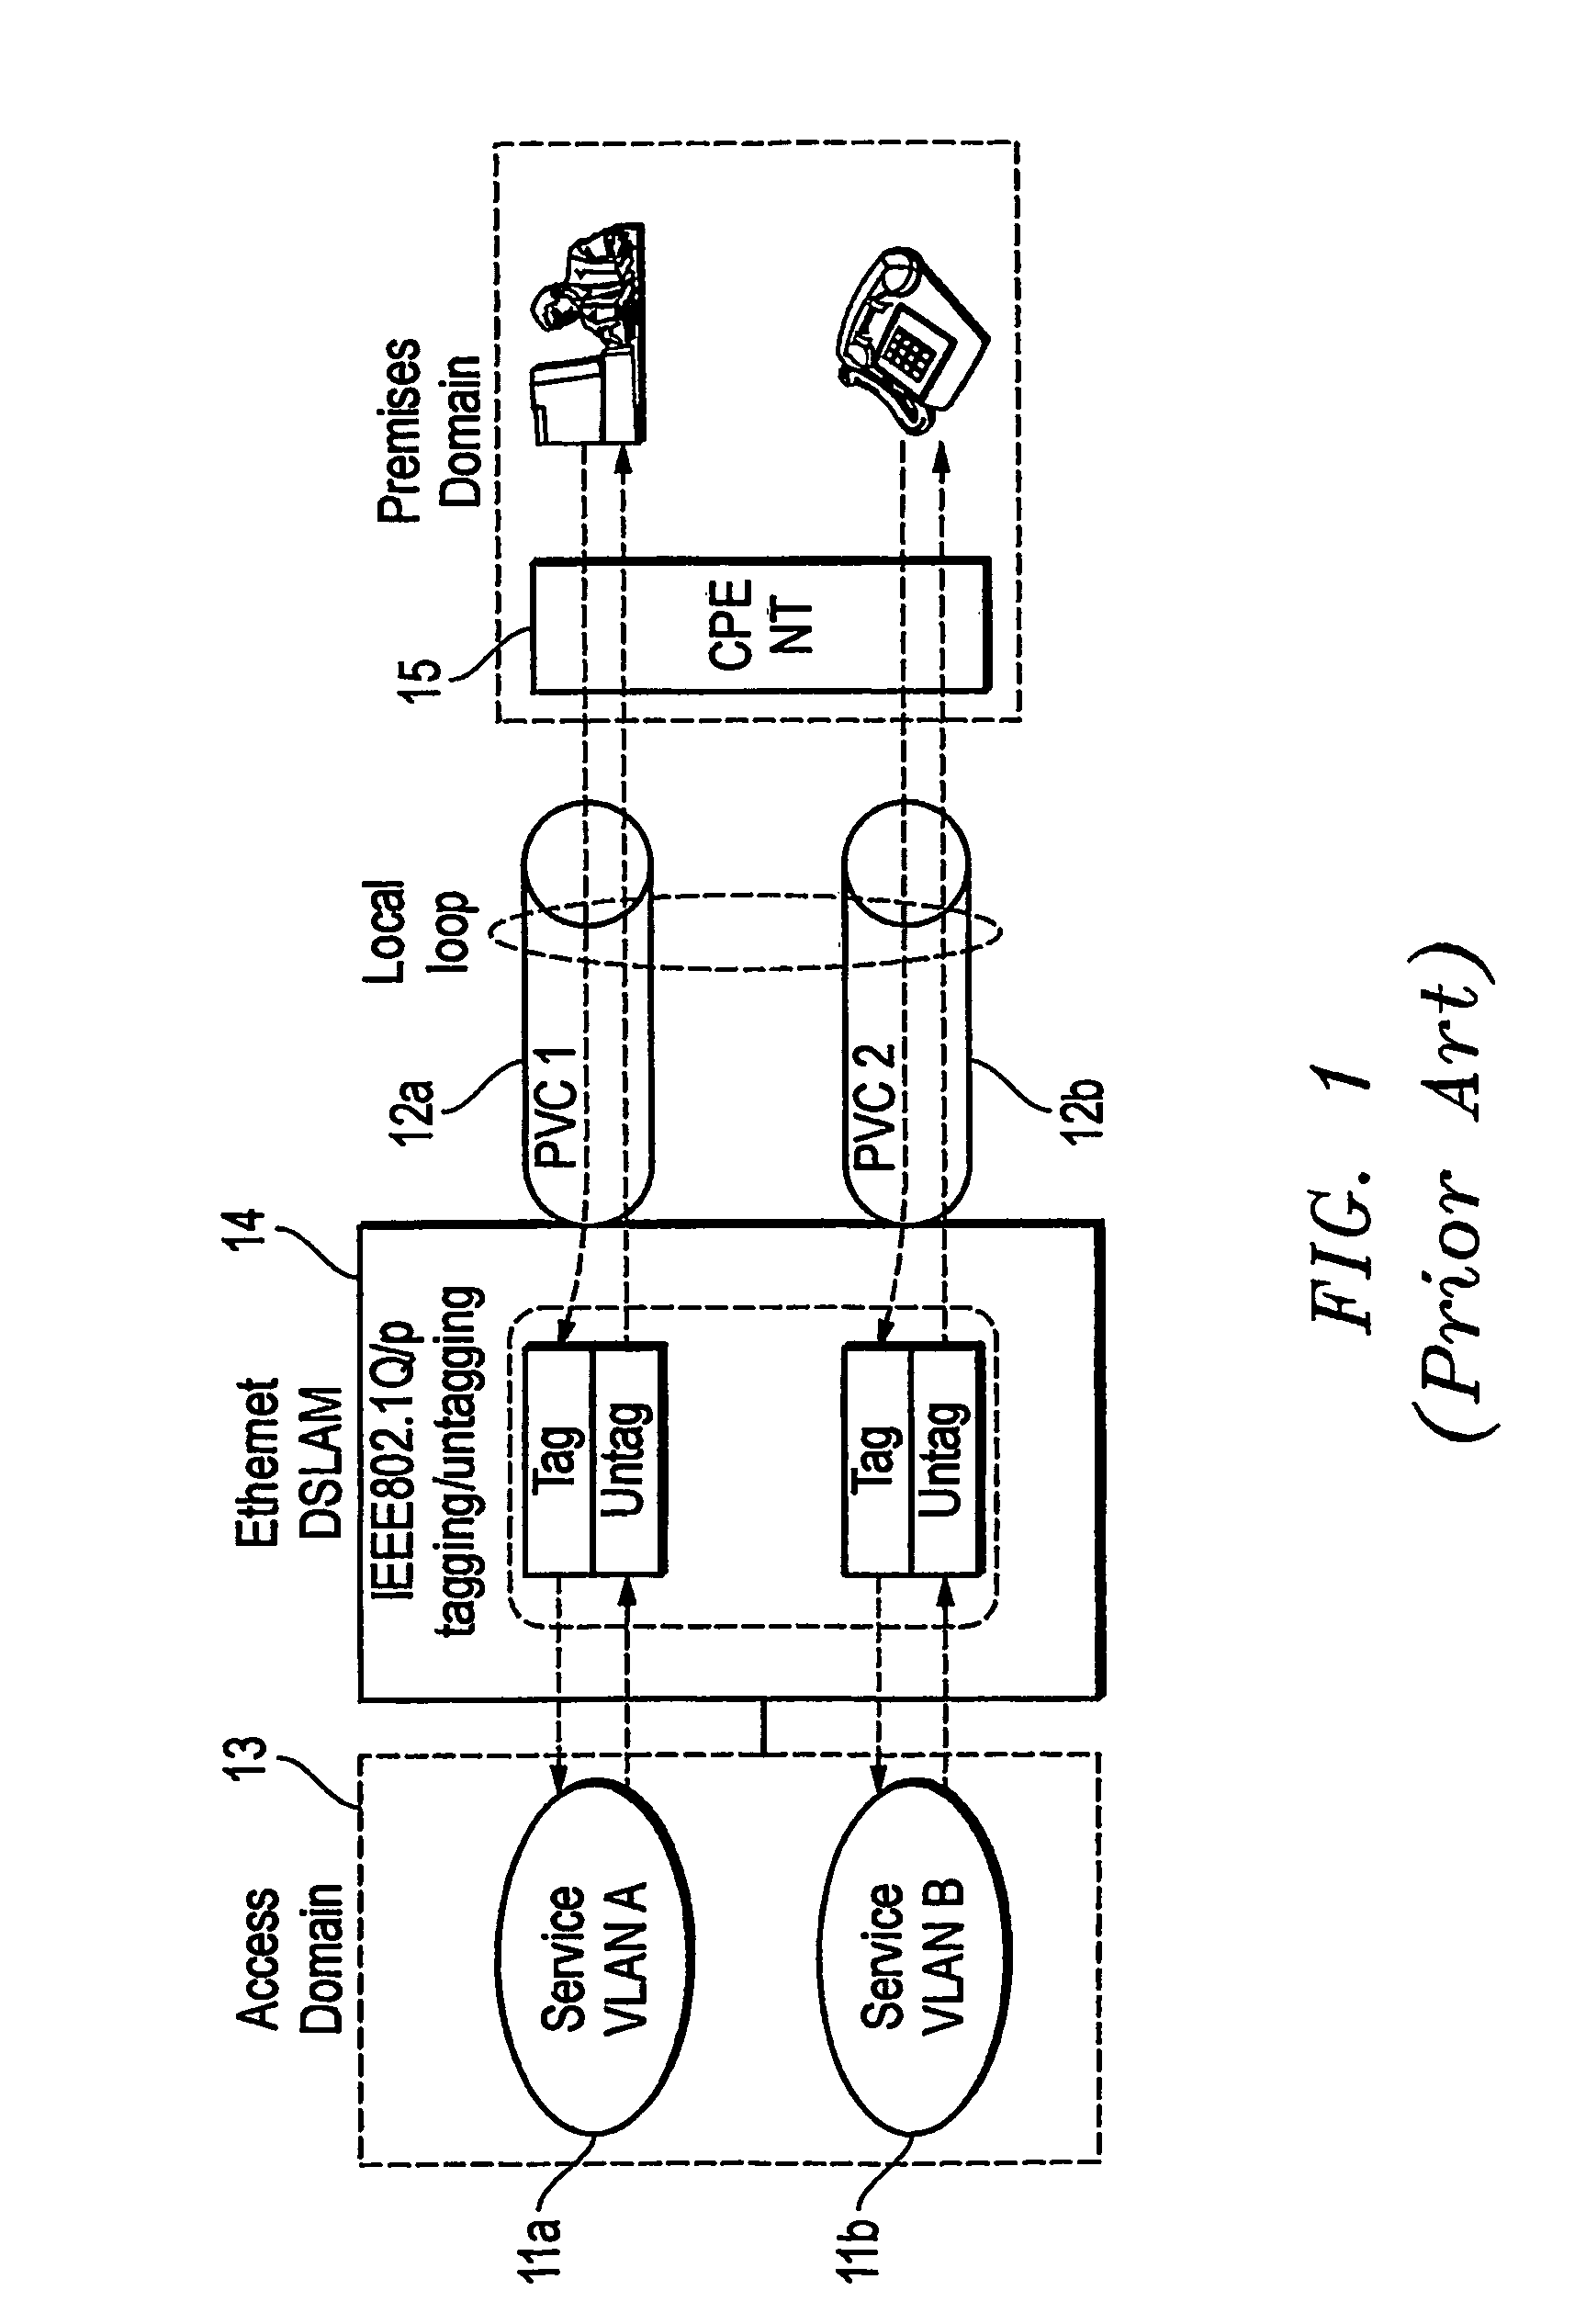 Ethernet DSL access multiplexer and method providing dynamic service selection and end-user configuration